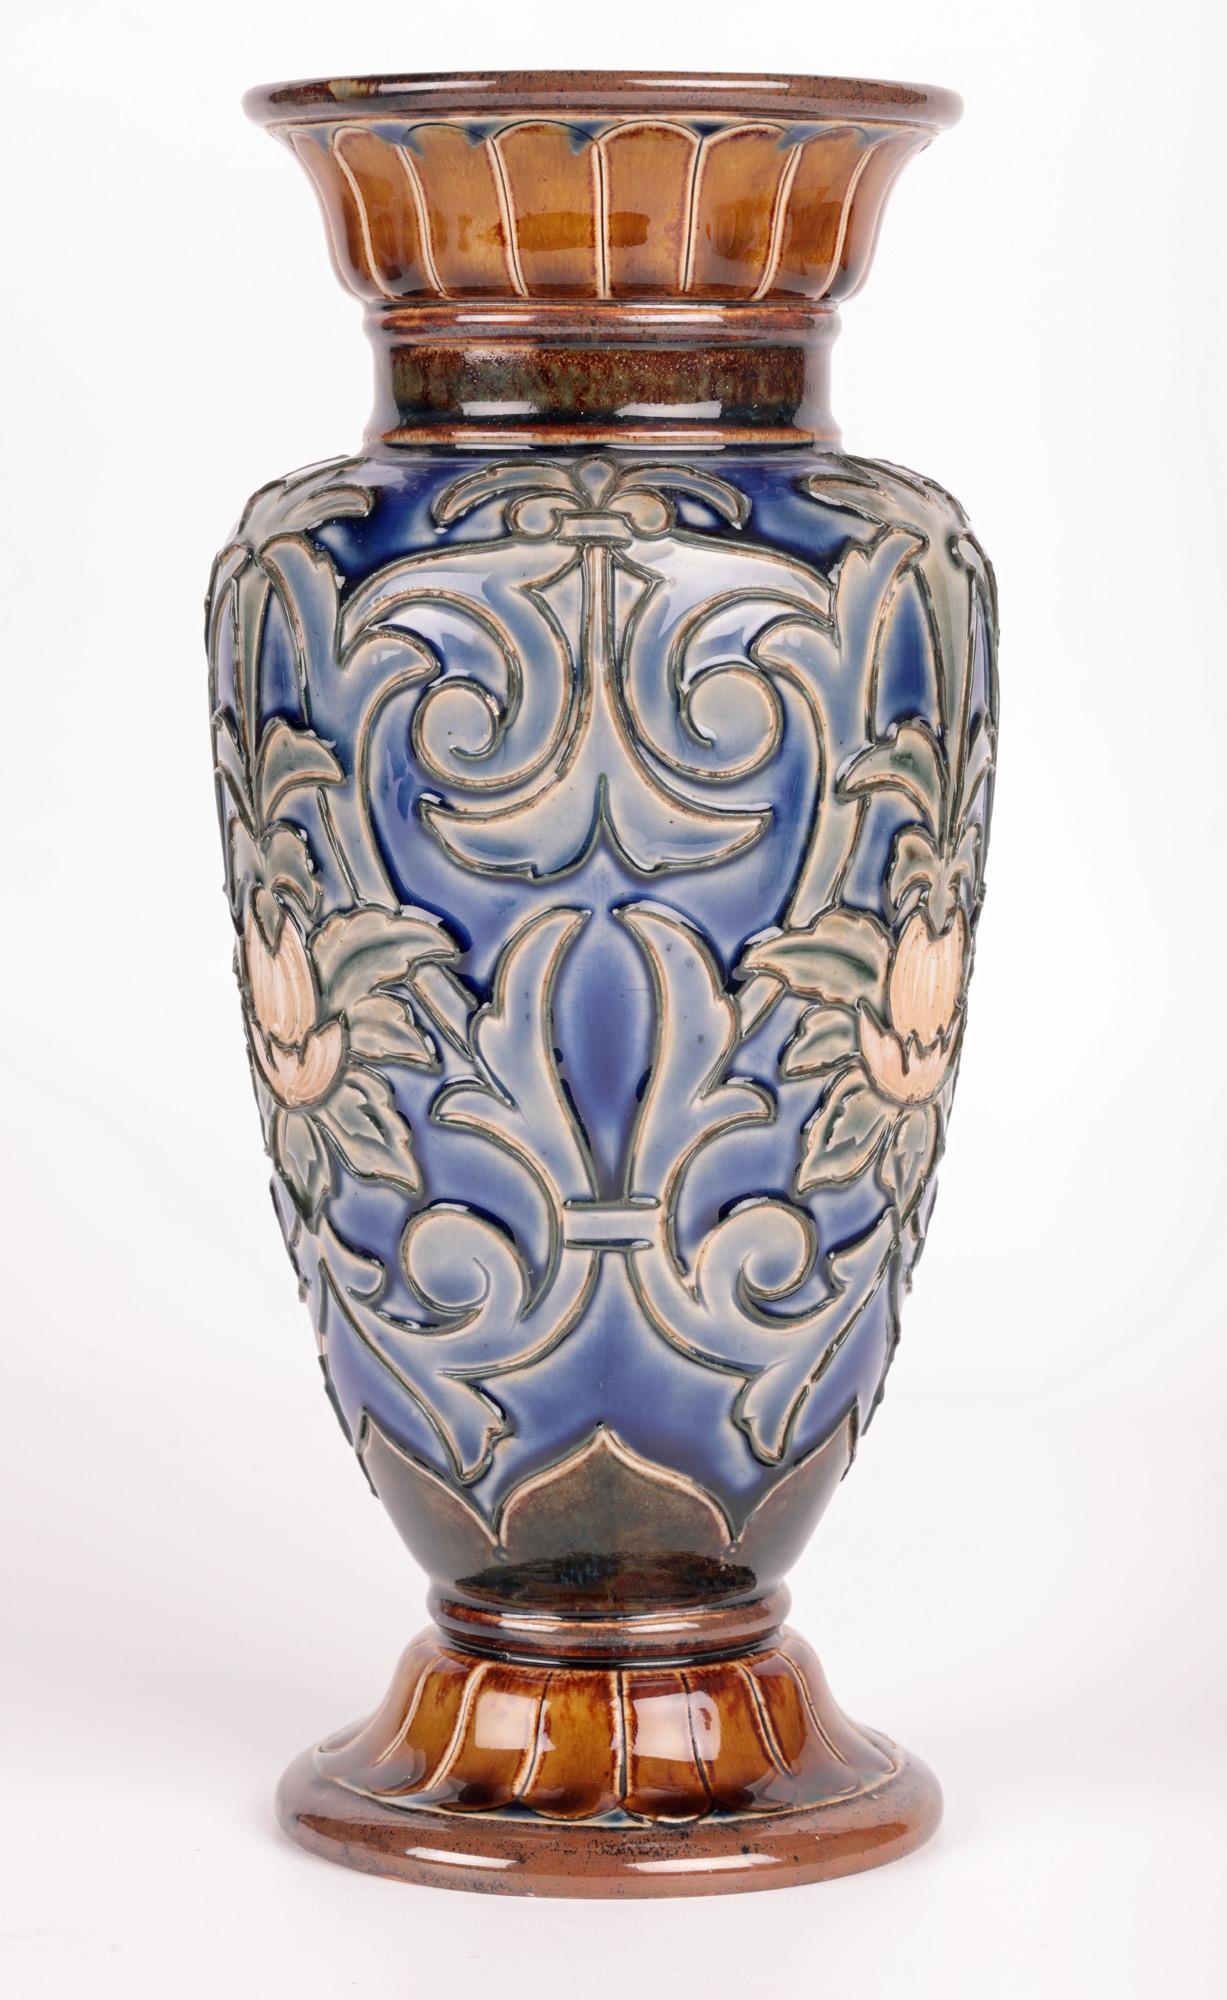 Late 19th Century Doulton Lambeth Stylized Floral Design Vase by Eliza Simmance